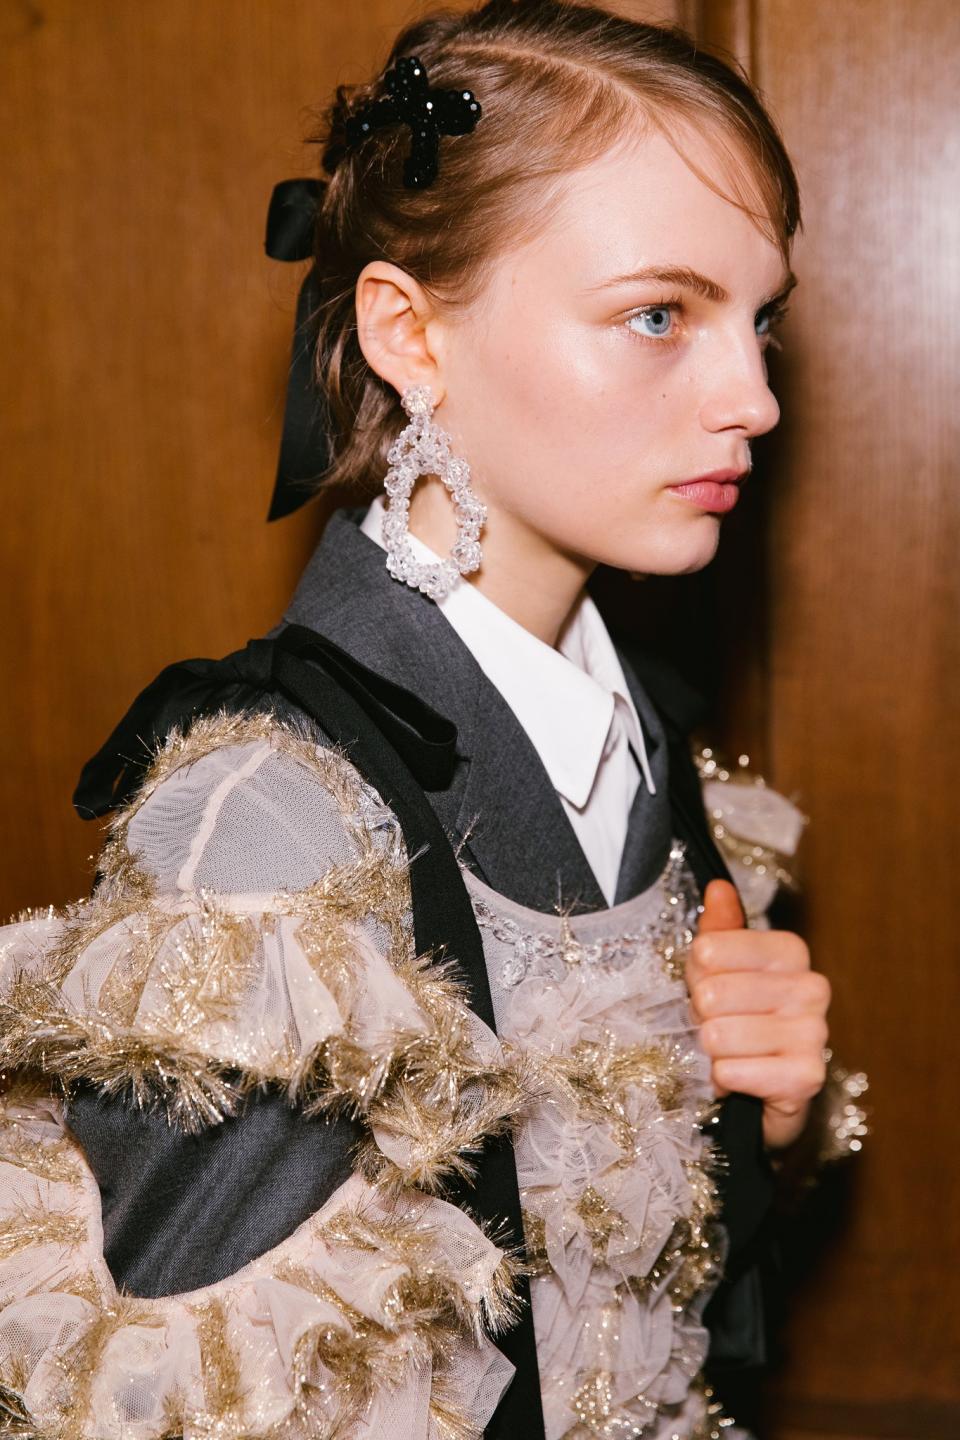 Today in London, models at Simone Rocha's Fall 2018 show wore a bevy of braids and bows that were equal parts pretty and irreverent.